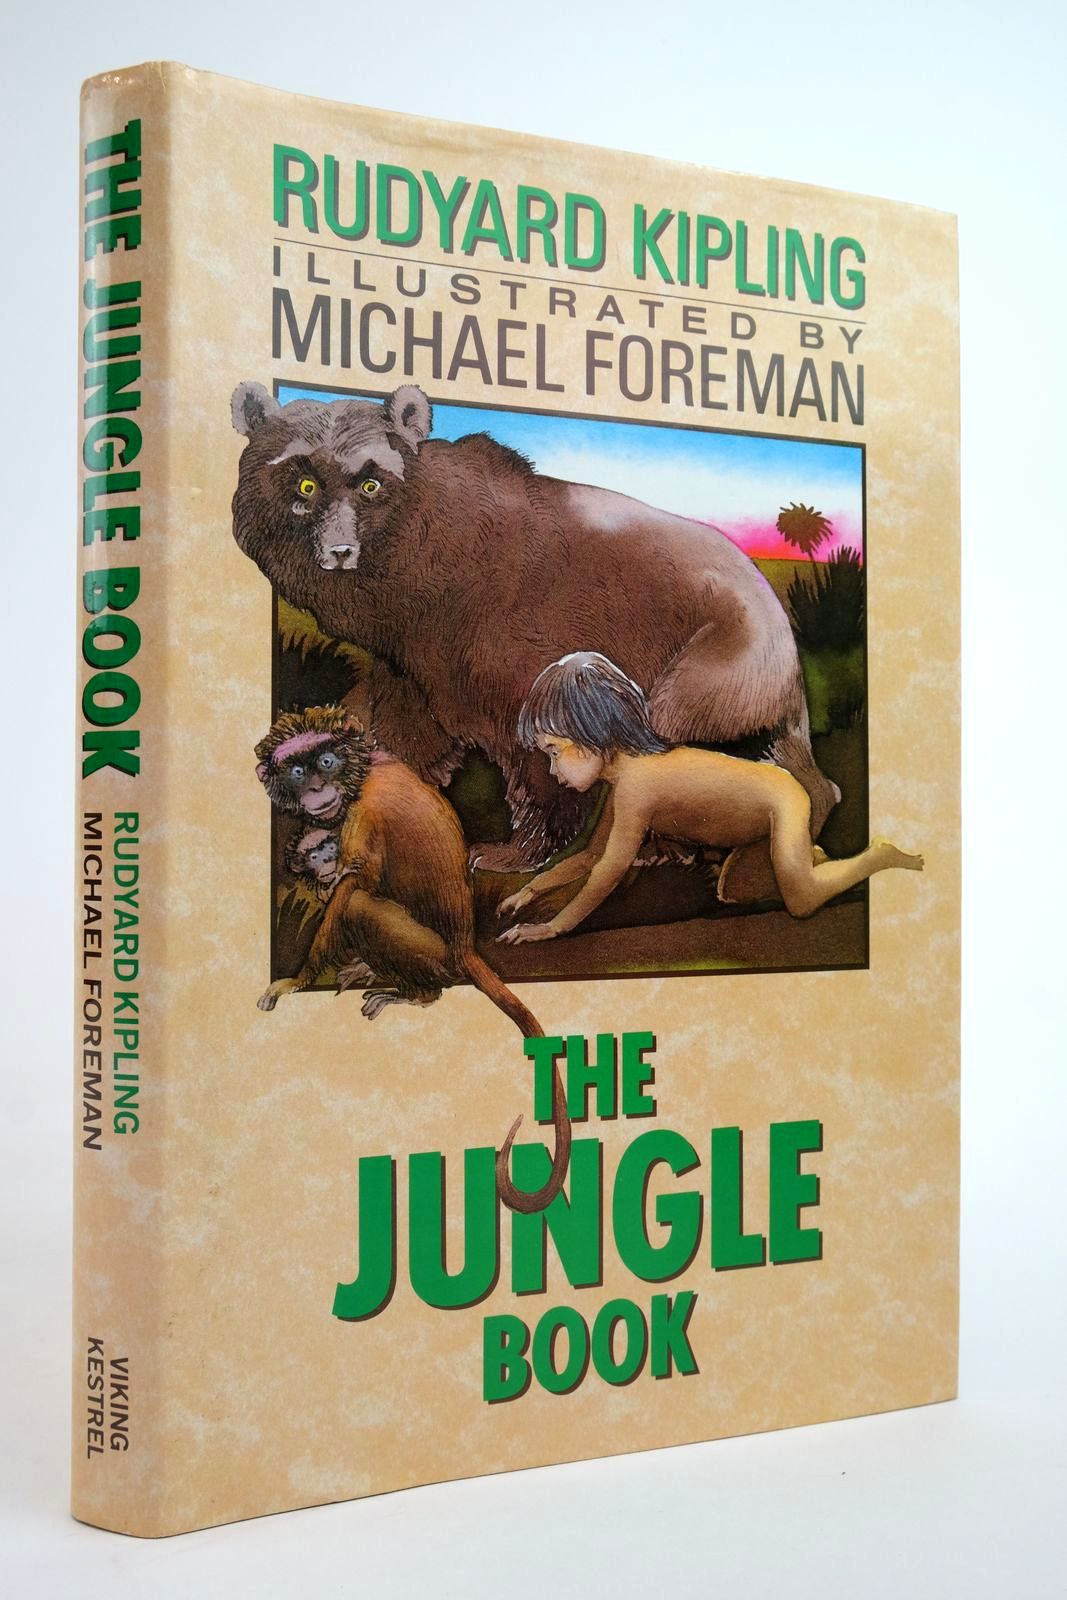 Photo of THE JUNGLE BOOK written by Kipling, Rudyard illustrated by Foreman, Michael published by Viking Kestrel (STOCK CODE: 2135611)  for sale by Stella & Rose's Books